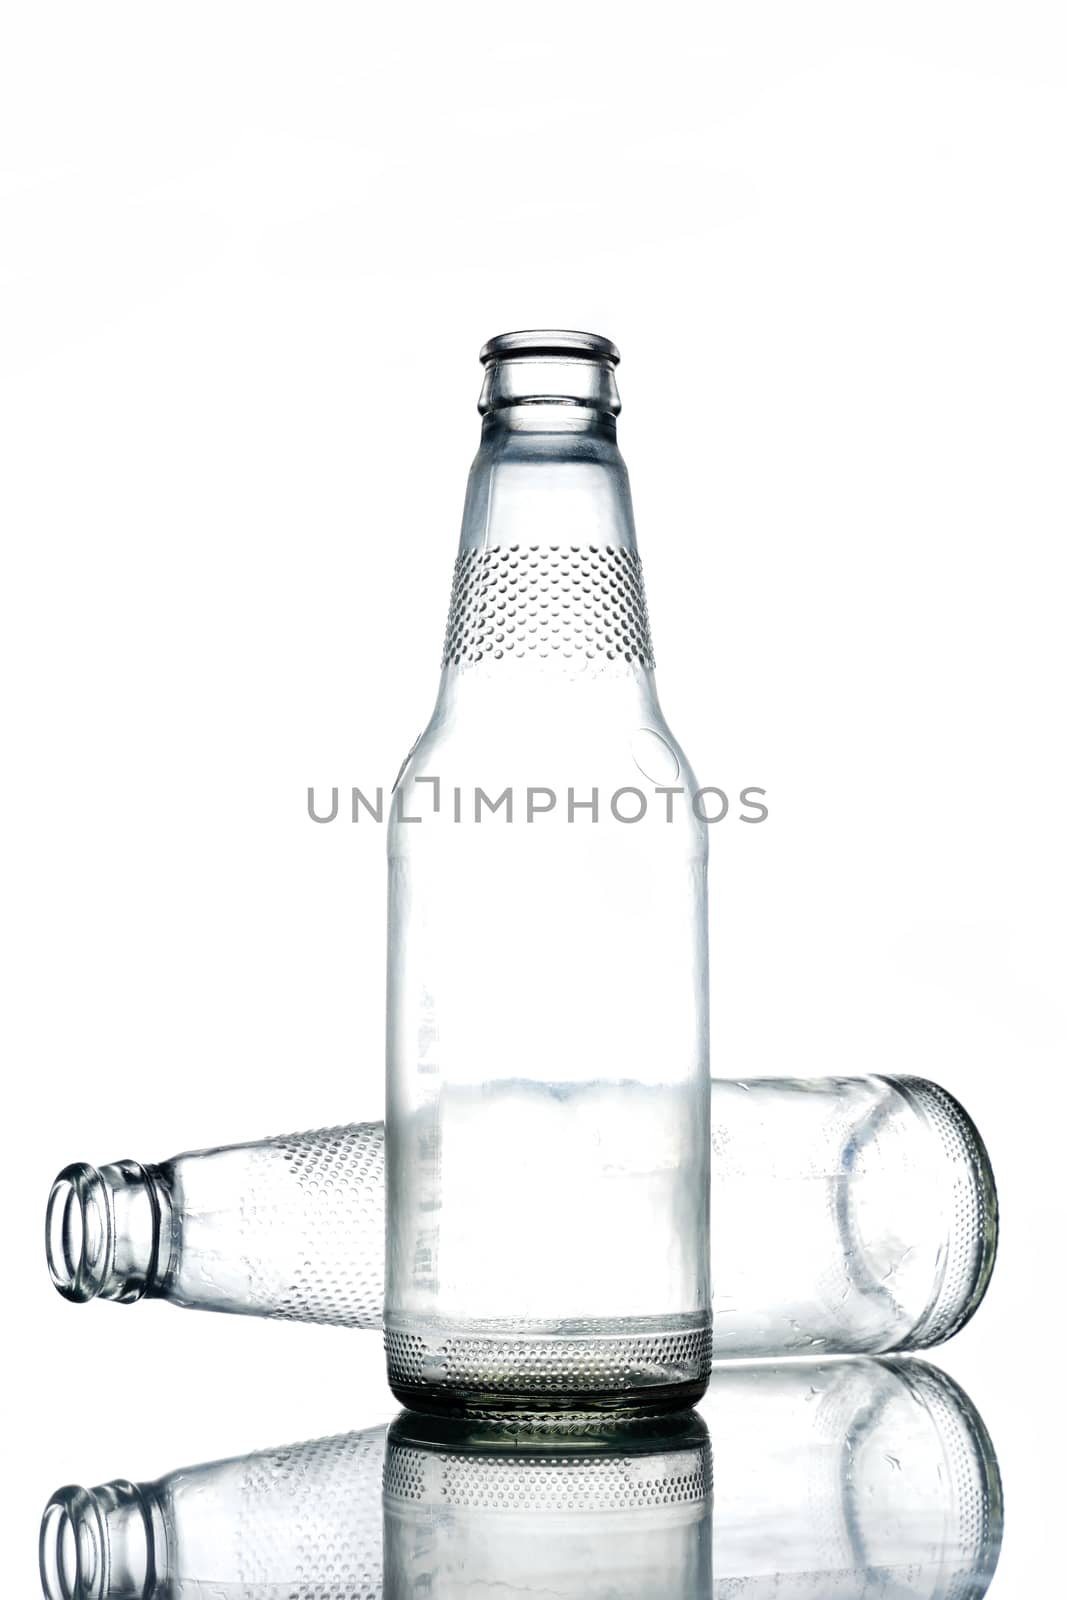 Empty colorless glass bottles on a white background.